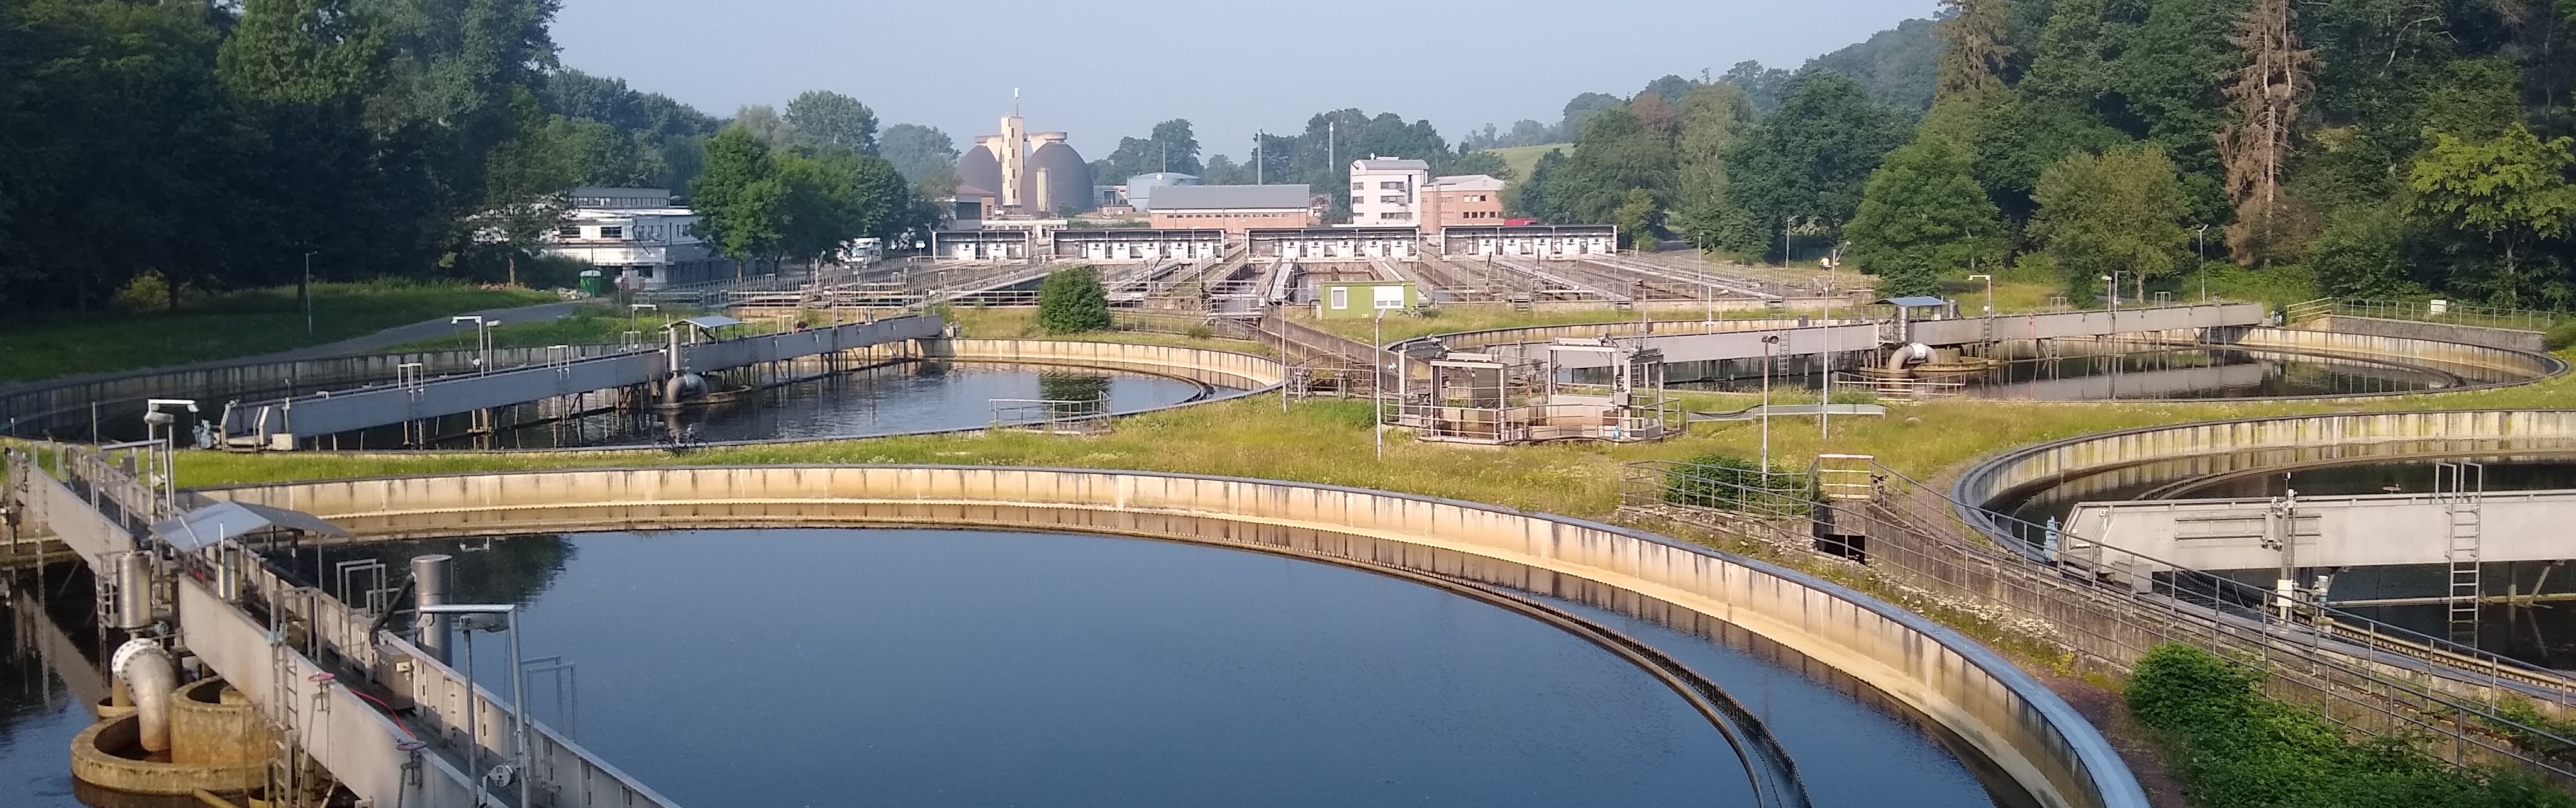 Overview of the sewage plant Aachen-Soers